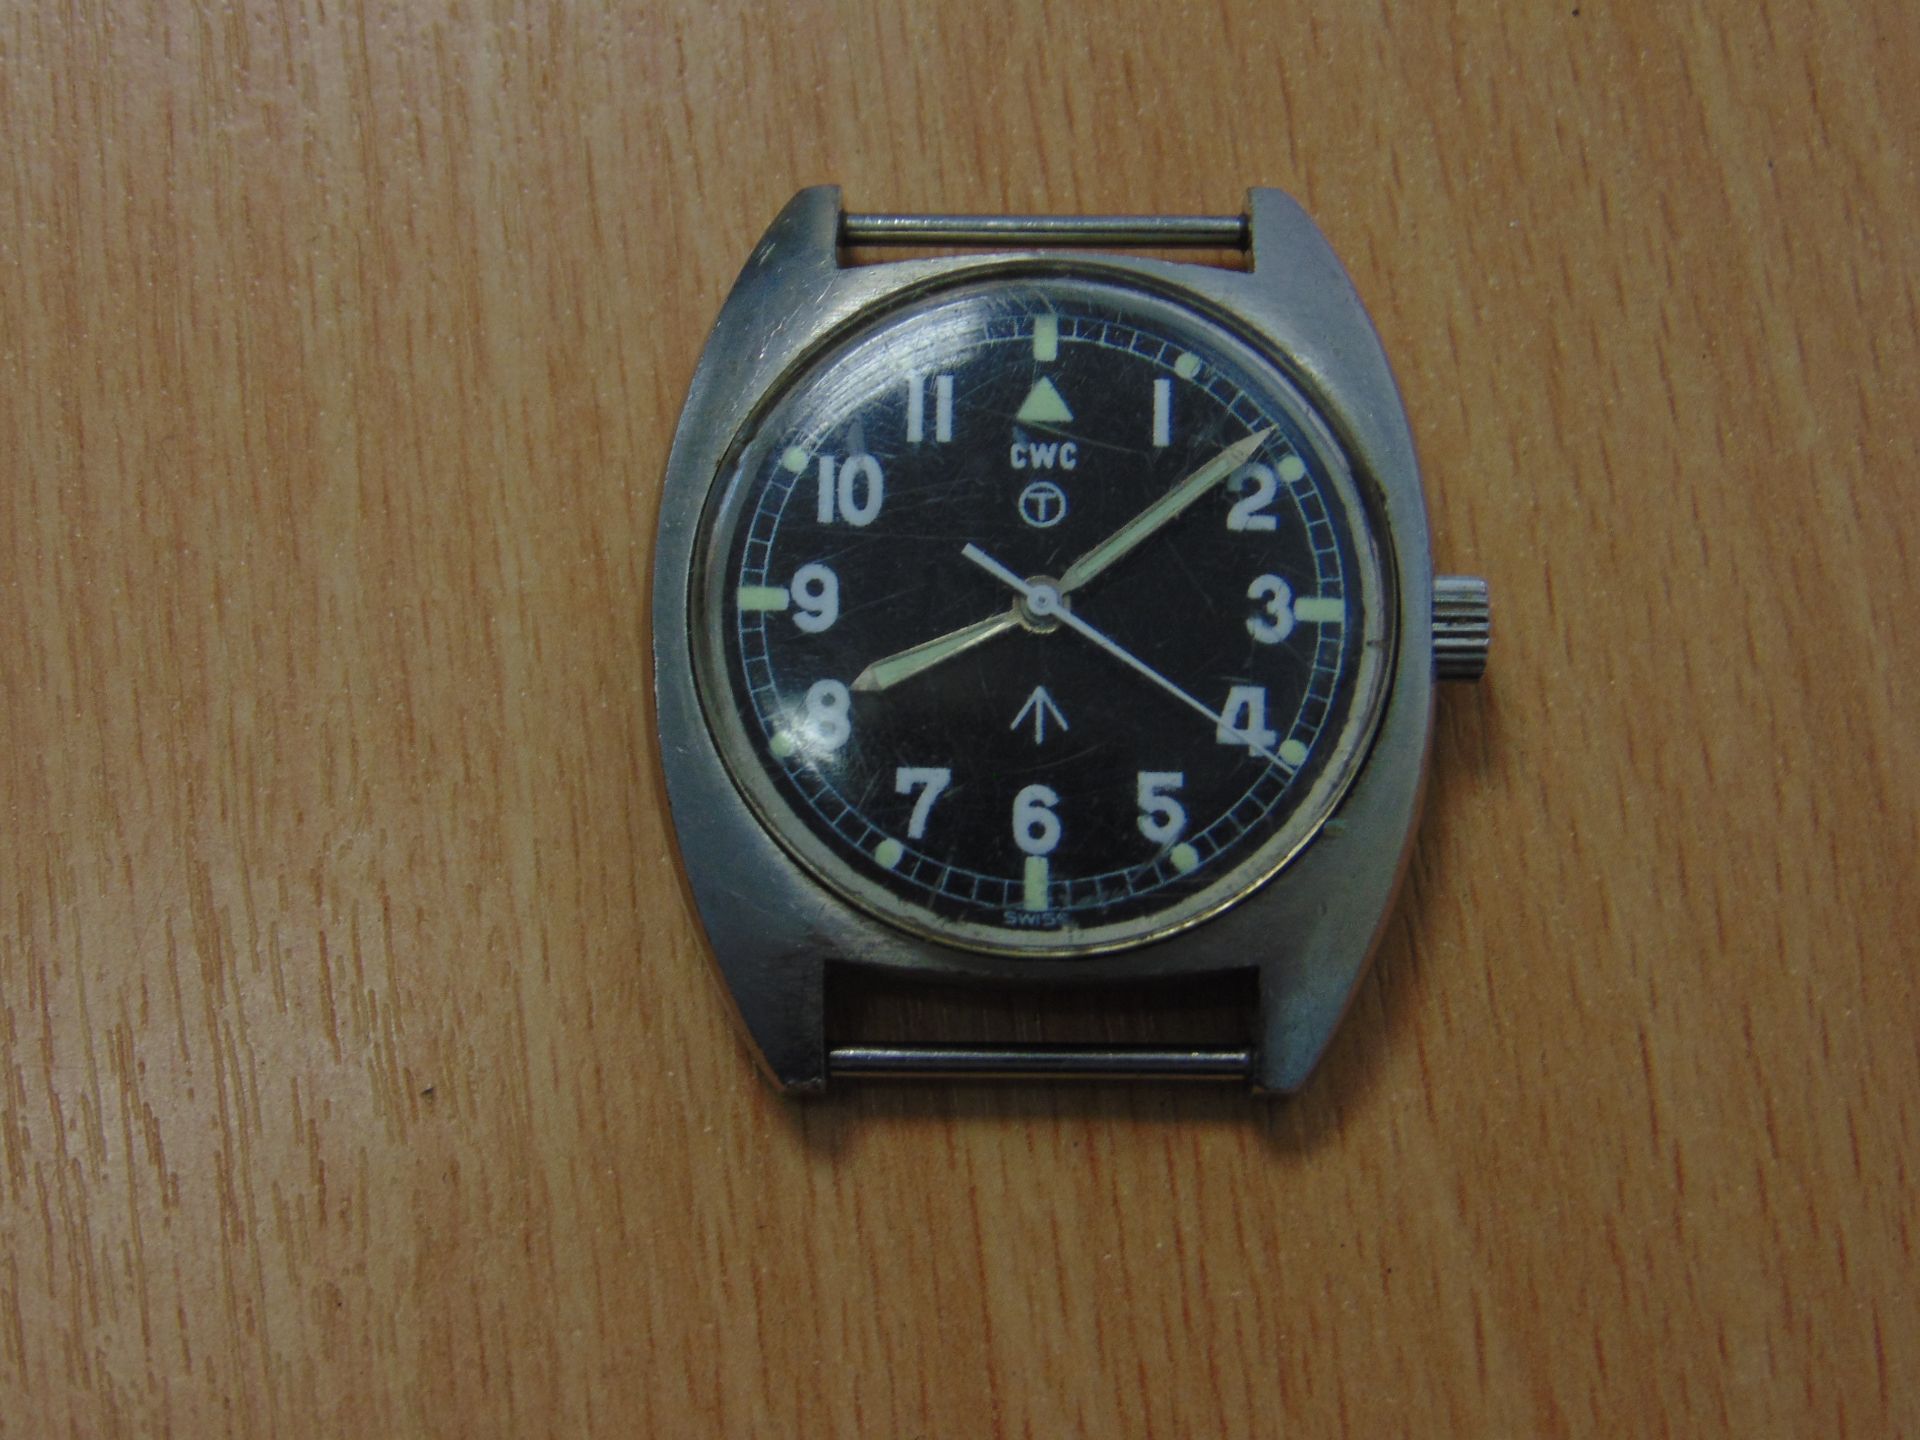 VERY RARE CWC MECHANICAL W10 SERVICE WATCH NATO MARKED - BROAD ARROW DATED 1976 - Image 5 of 10